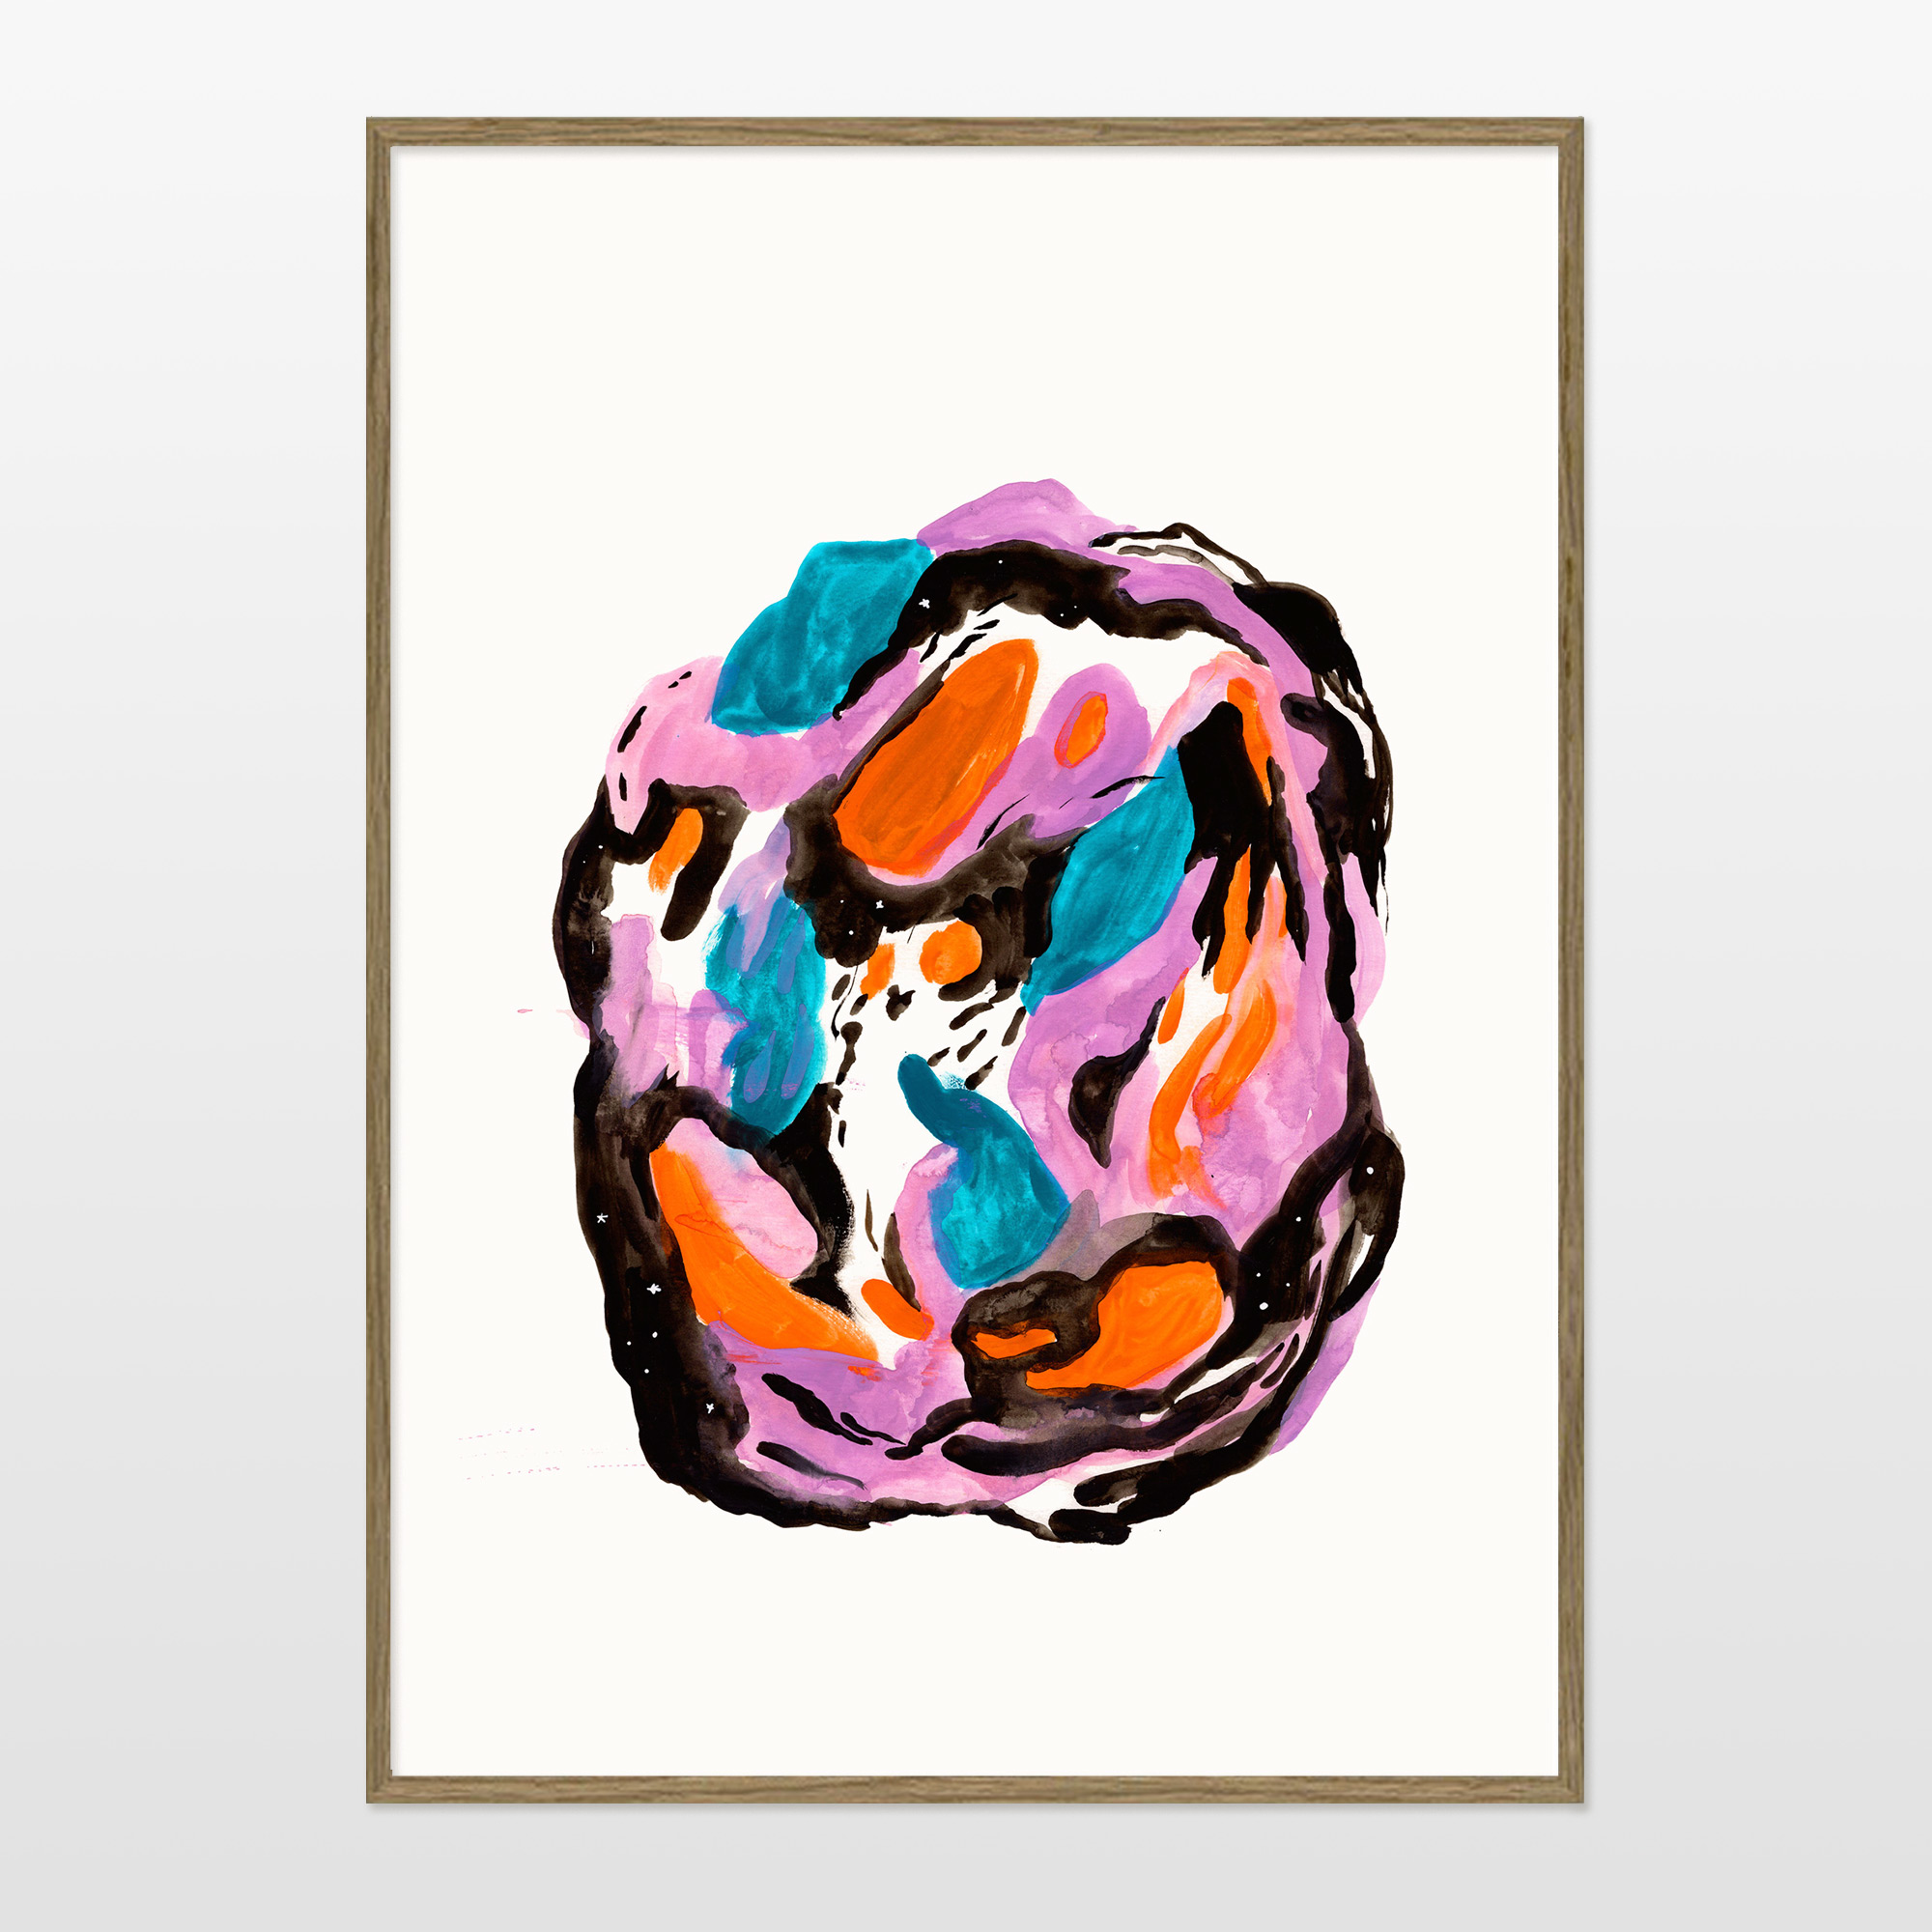 posters-prints, giclee-print, abstract, colorful, graphical, illustrative, botany, movement, patterns, black, blue, orange, purple, ink, paper, abstract-forms, beautiful, contemporary-art, danish, decorative, design, interior, interior-design, modern, modern-art, nordic, romantic, scandinavien, Buy original high quality art. Paintings, drawings, limited edition prints & posters by talented artists.